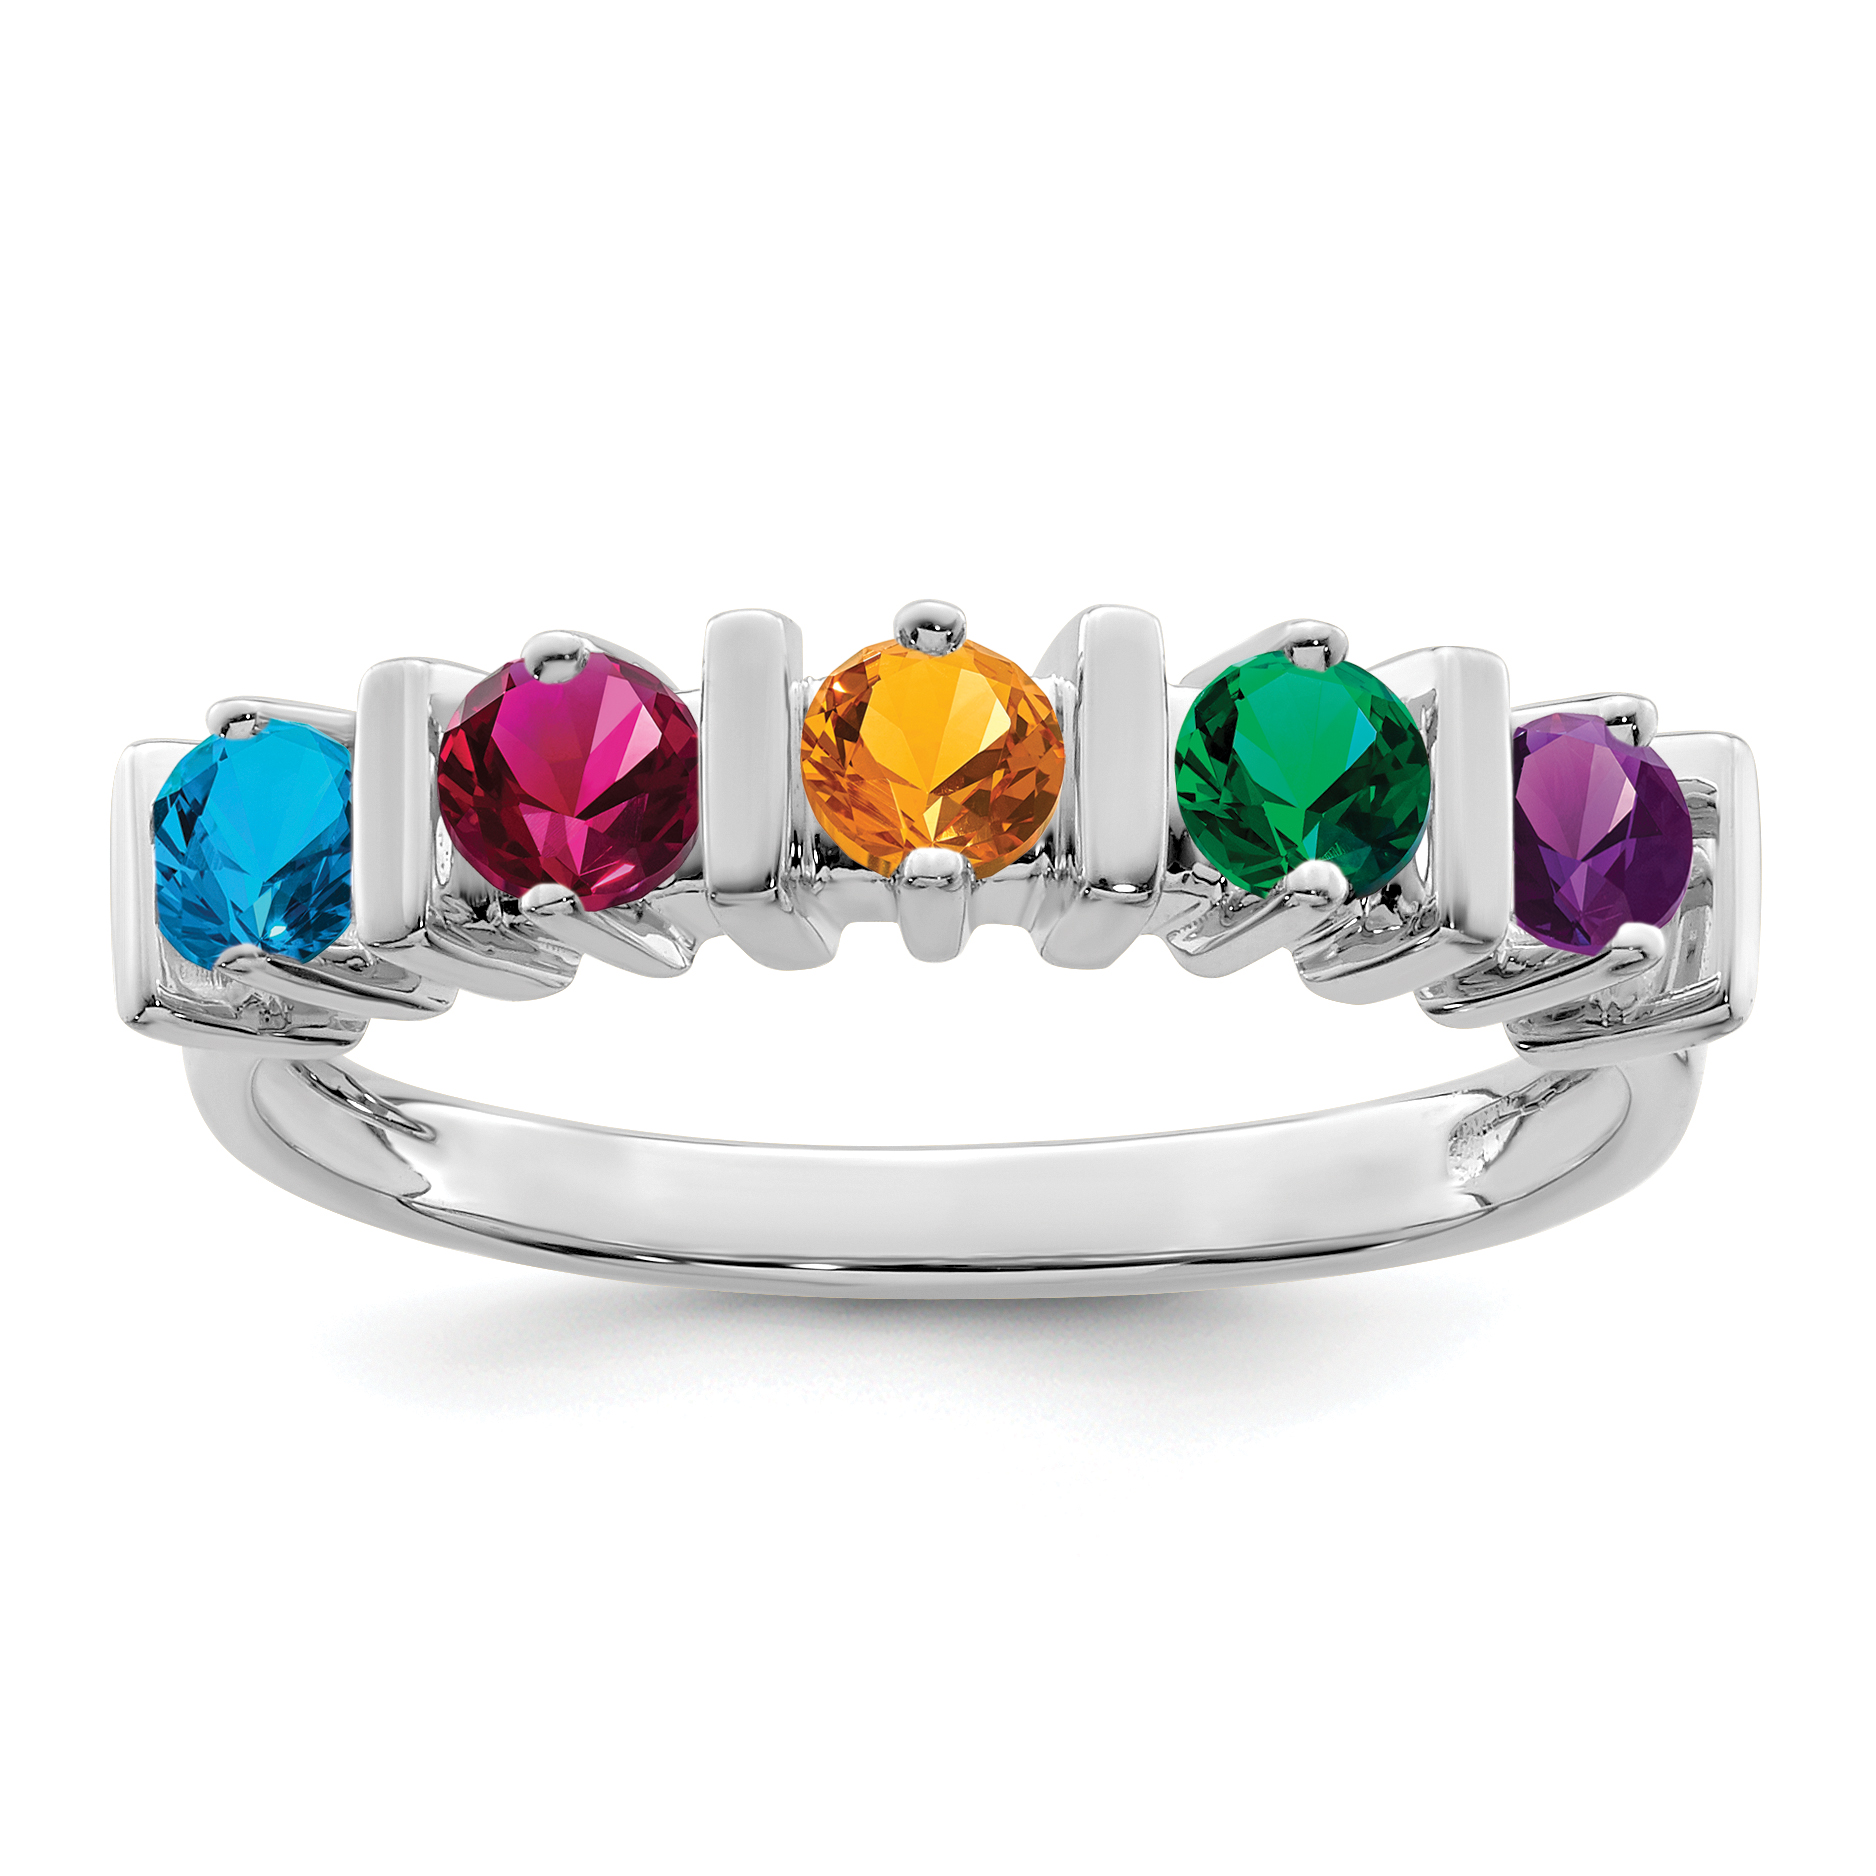 Family Celebration Sterling Silver Synthetic 5 Stone Mother's Ring